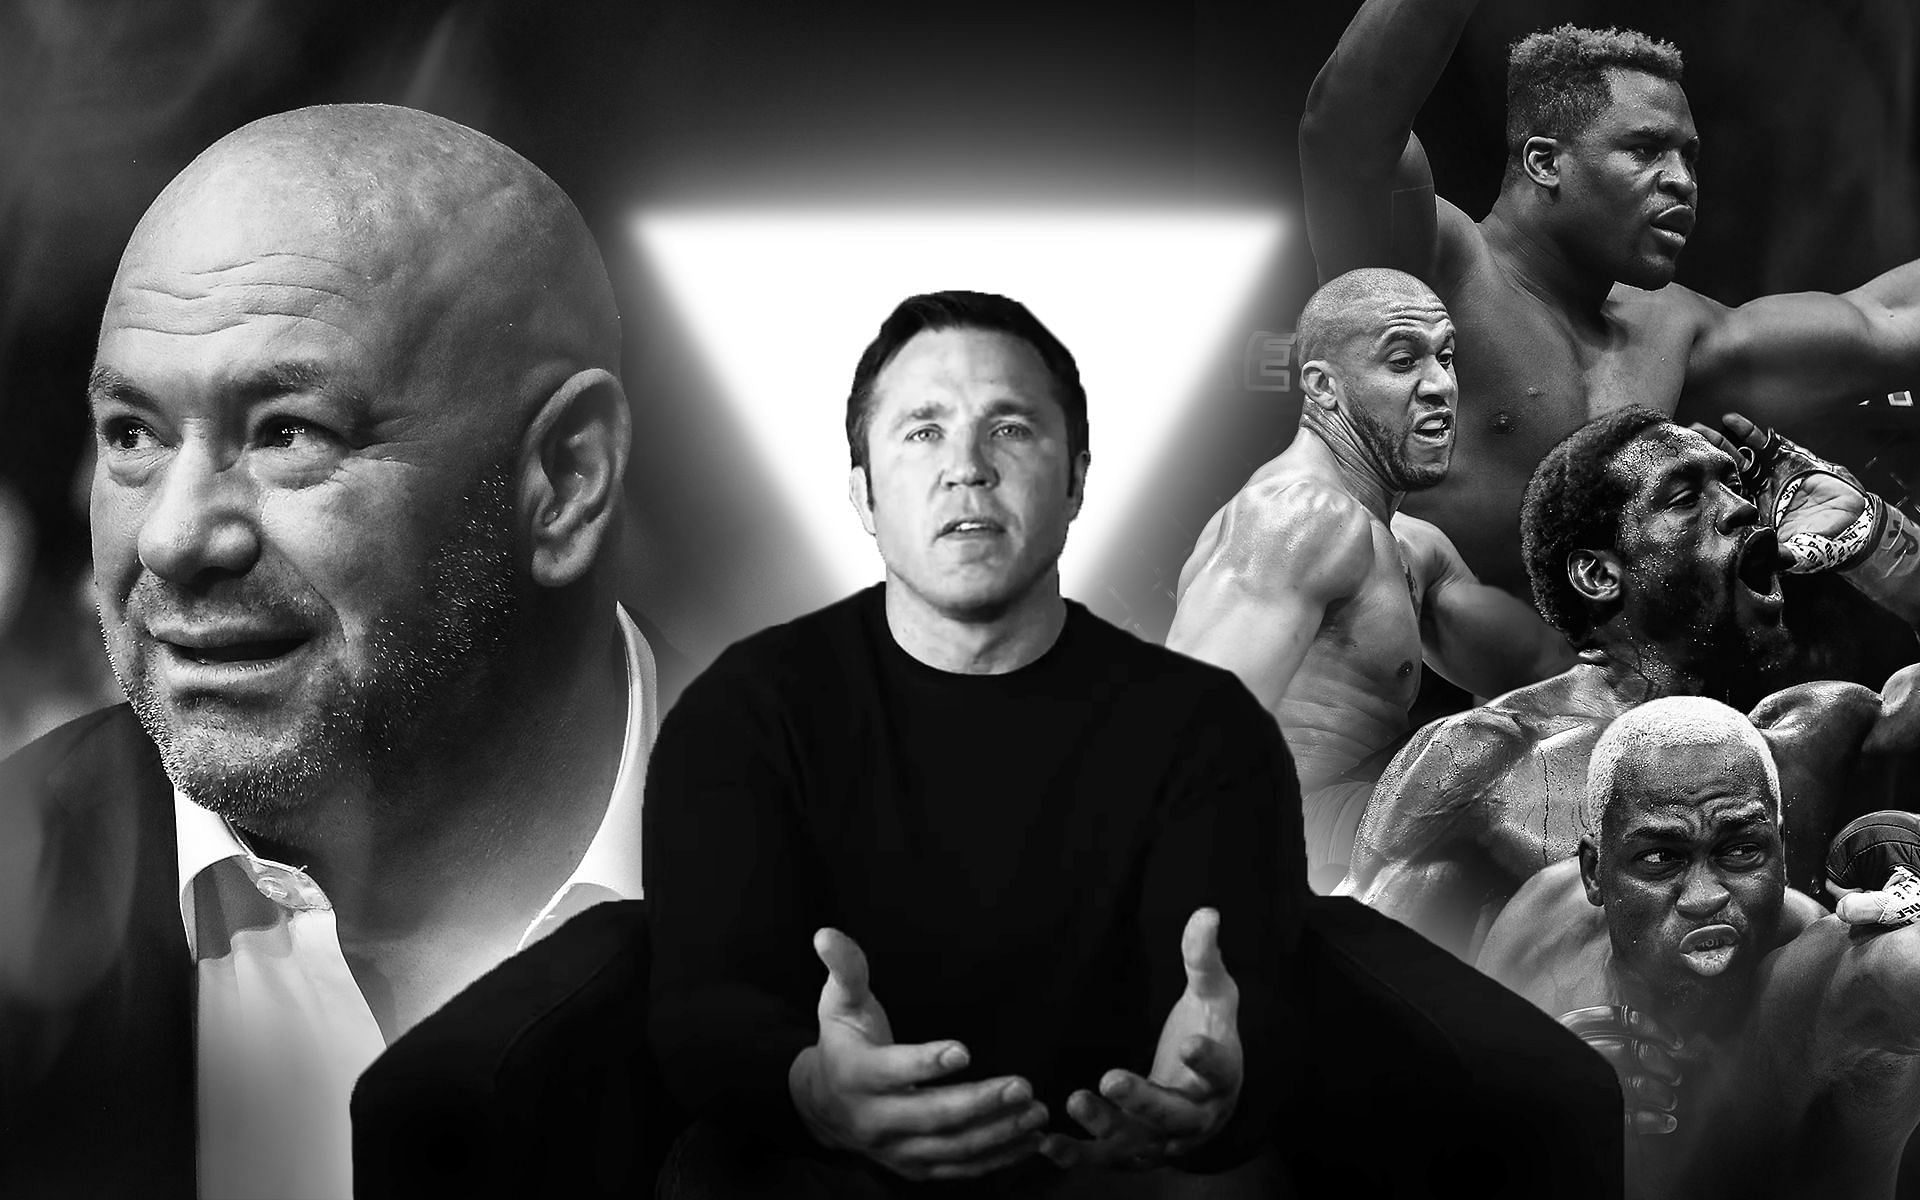 Chael Sonnen blames fighters for not promoting UFC 271 [Image Credits: Getty, YouTube/ChaelSonnenOfficial]